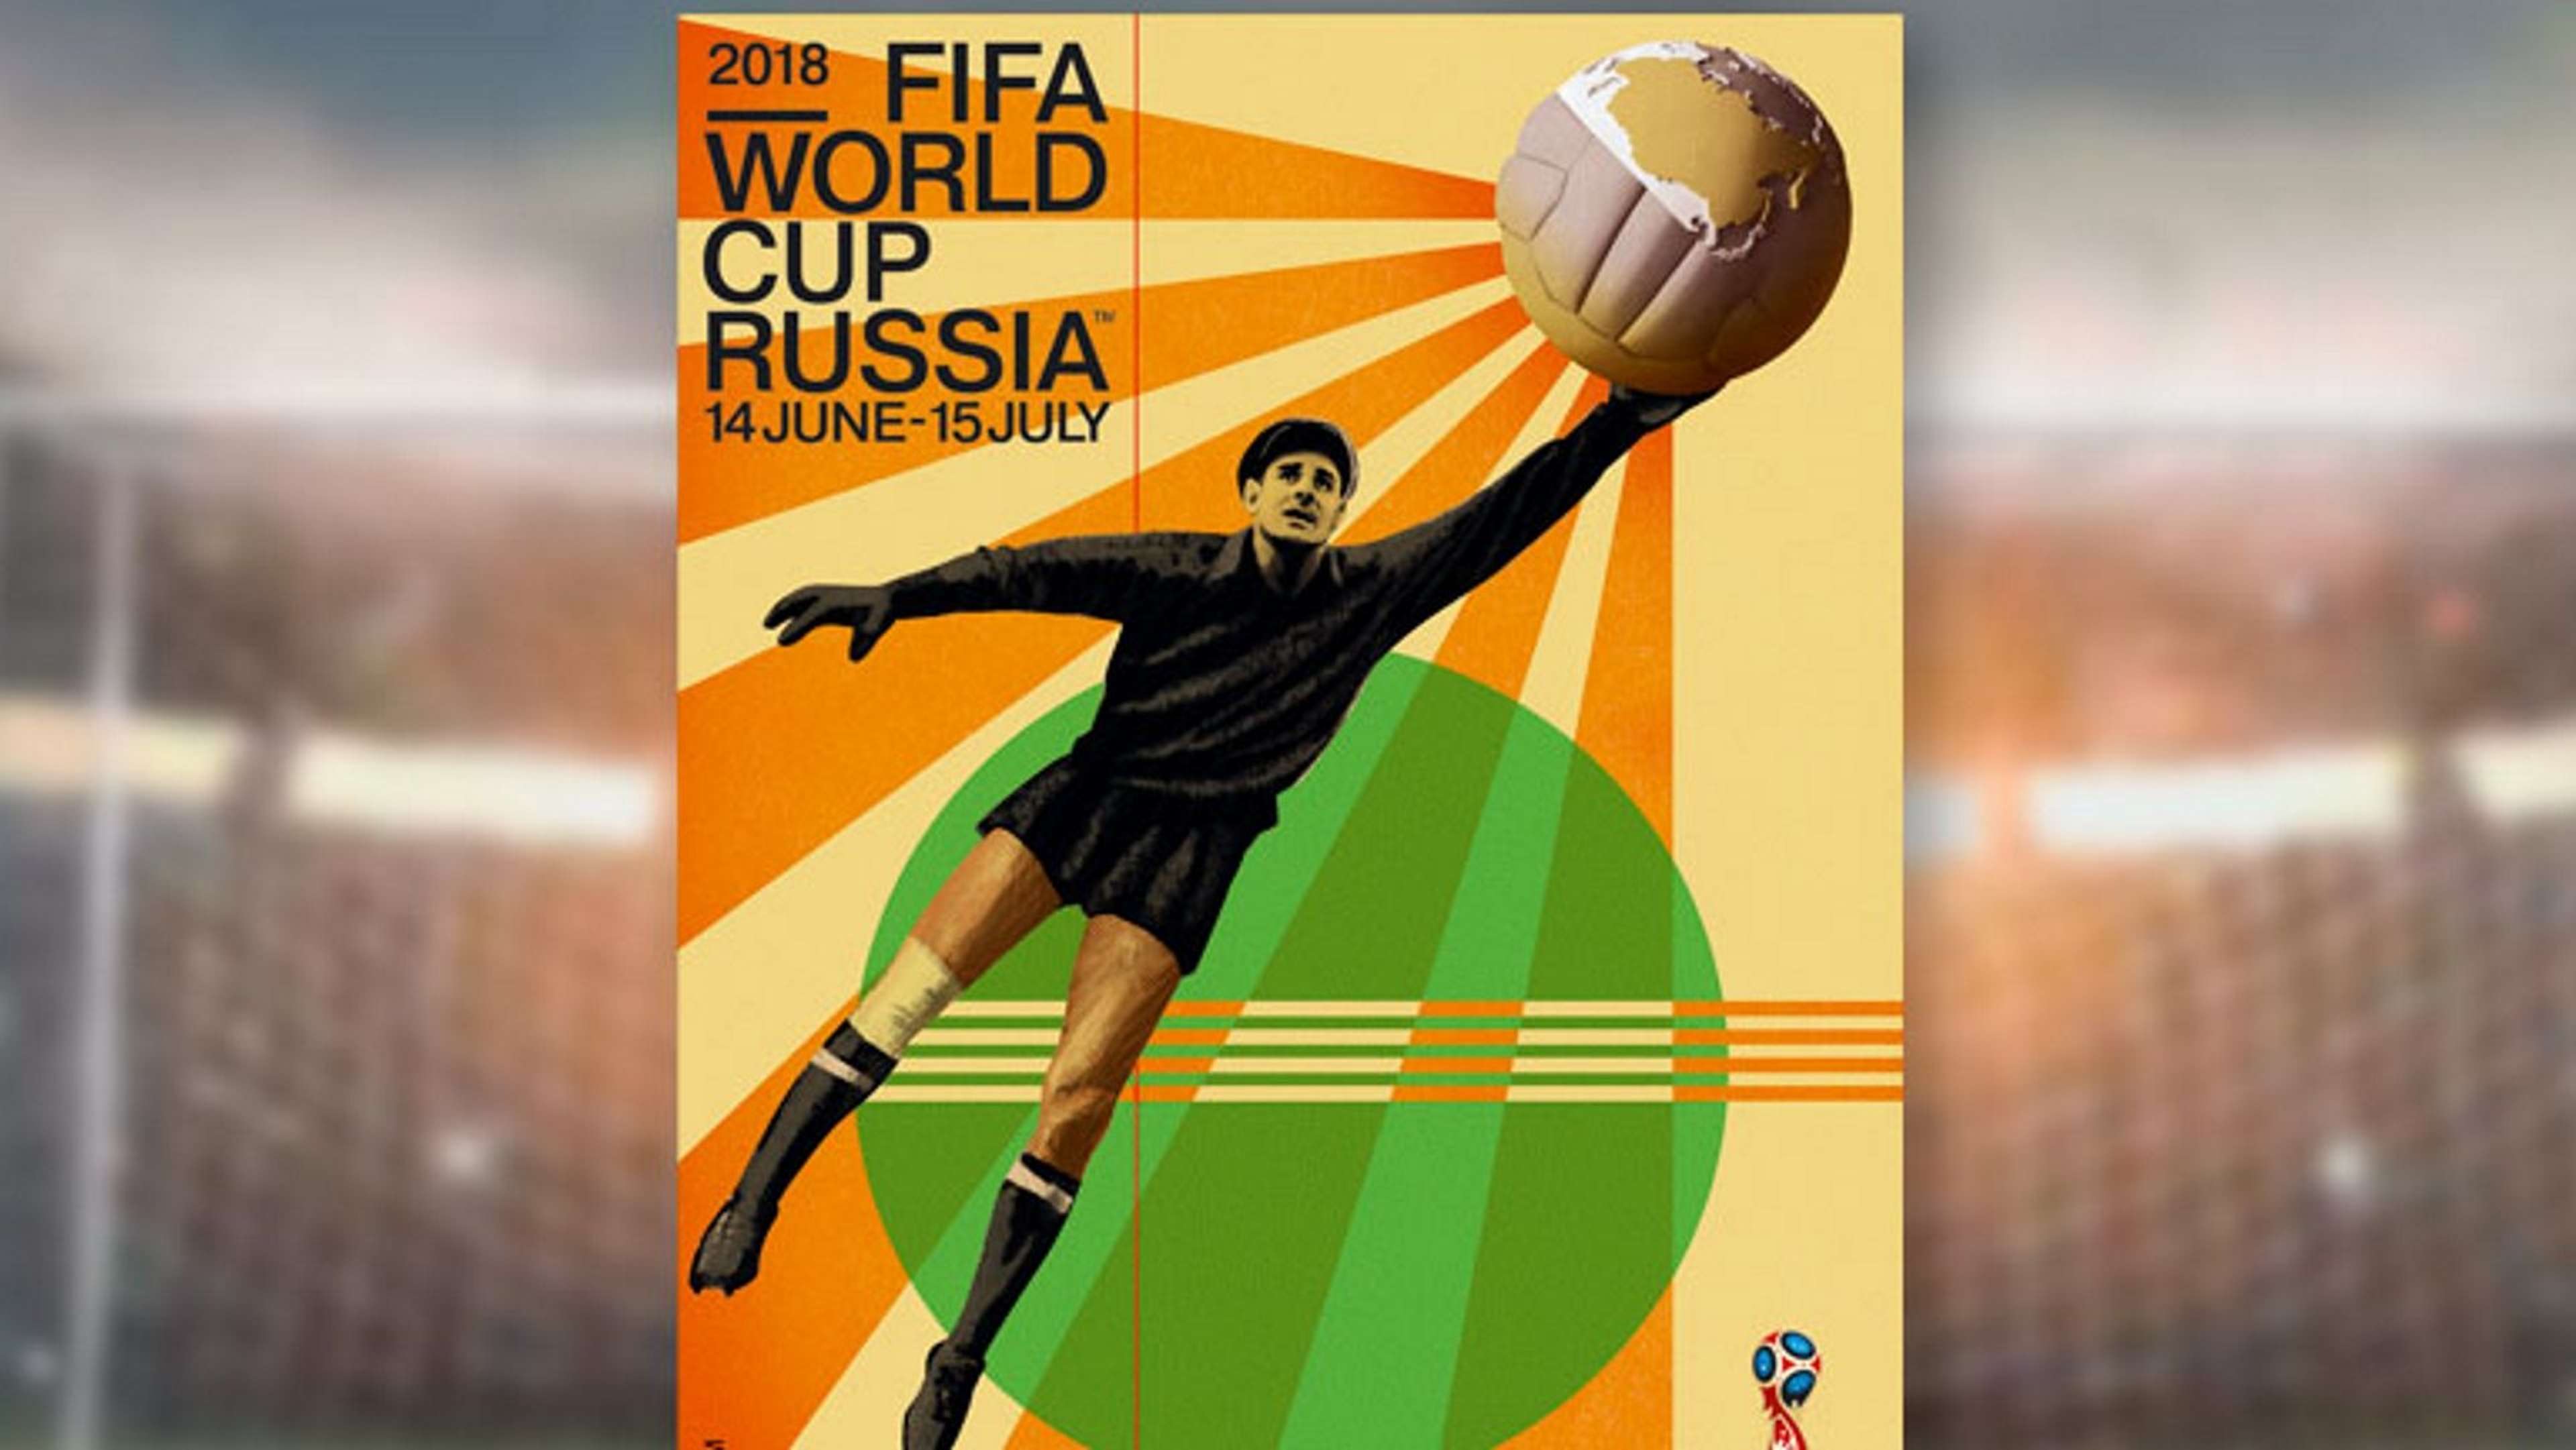 2018 Russia FIFA World Cup poster